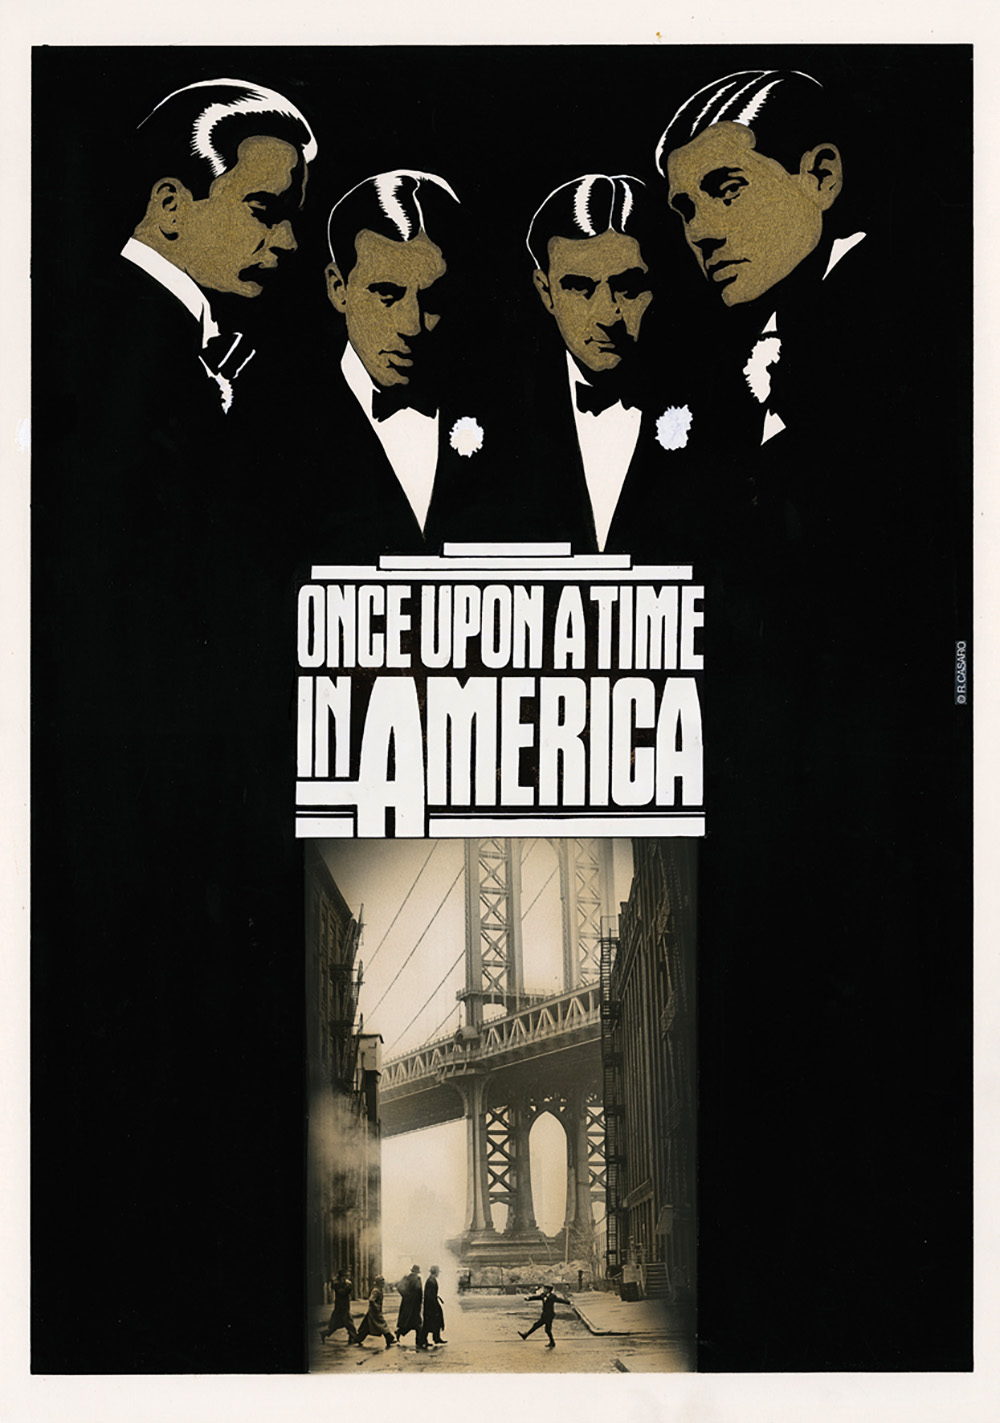 Once upon a time in America, Renato Casaro